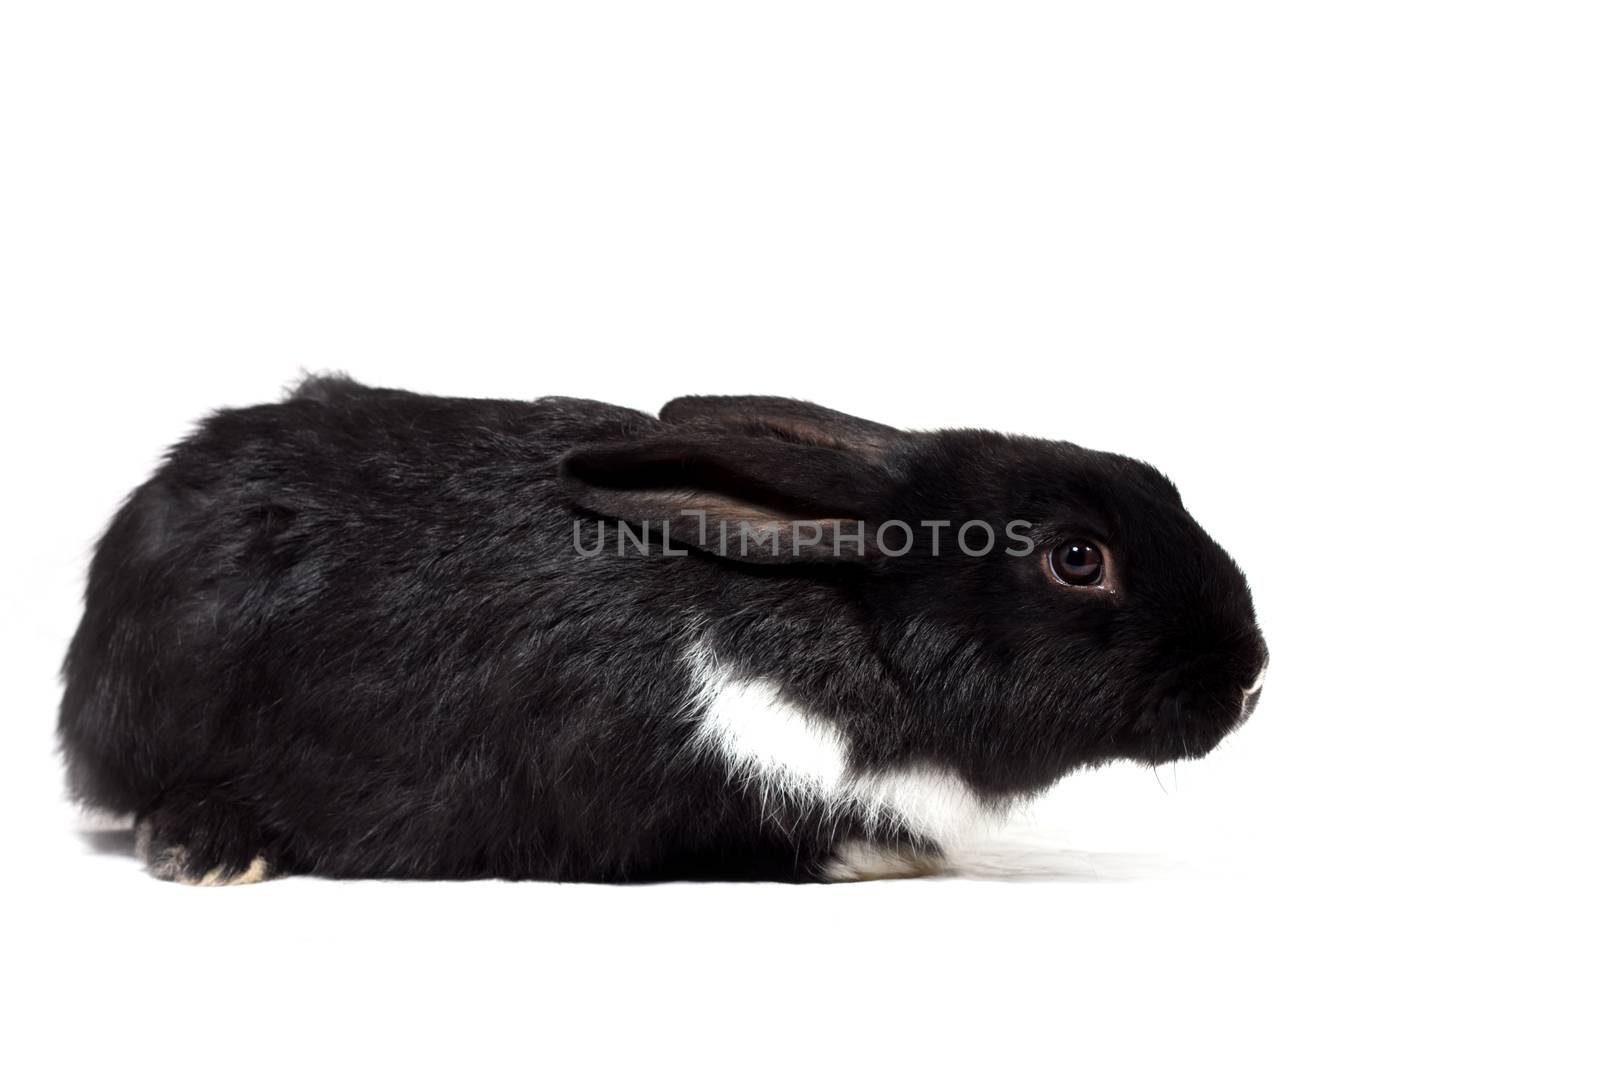 Big fluffy black bunny isolated on white background. Easter Bunny.